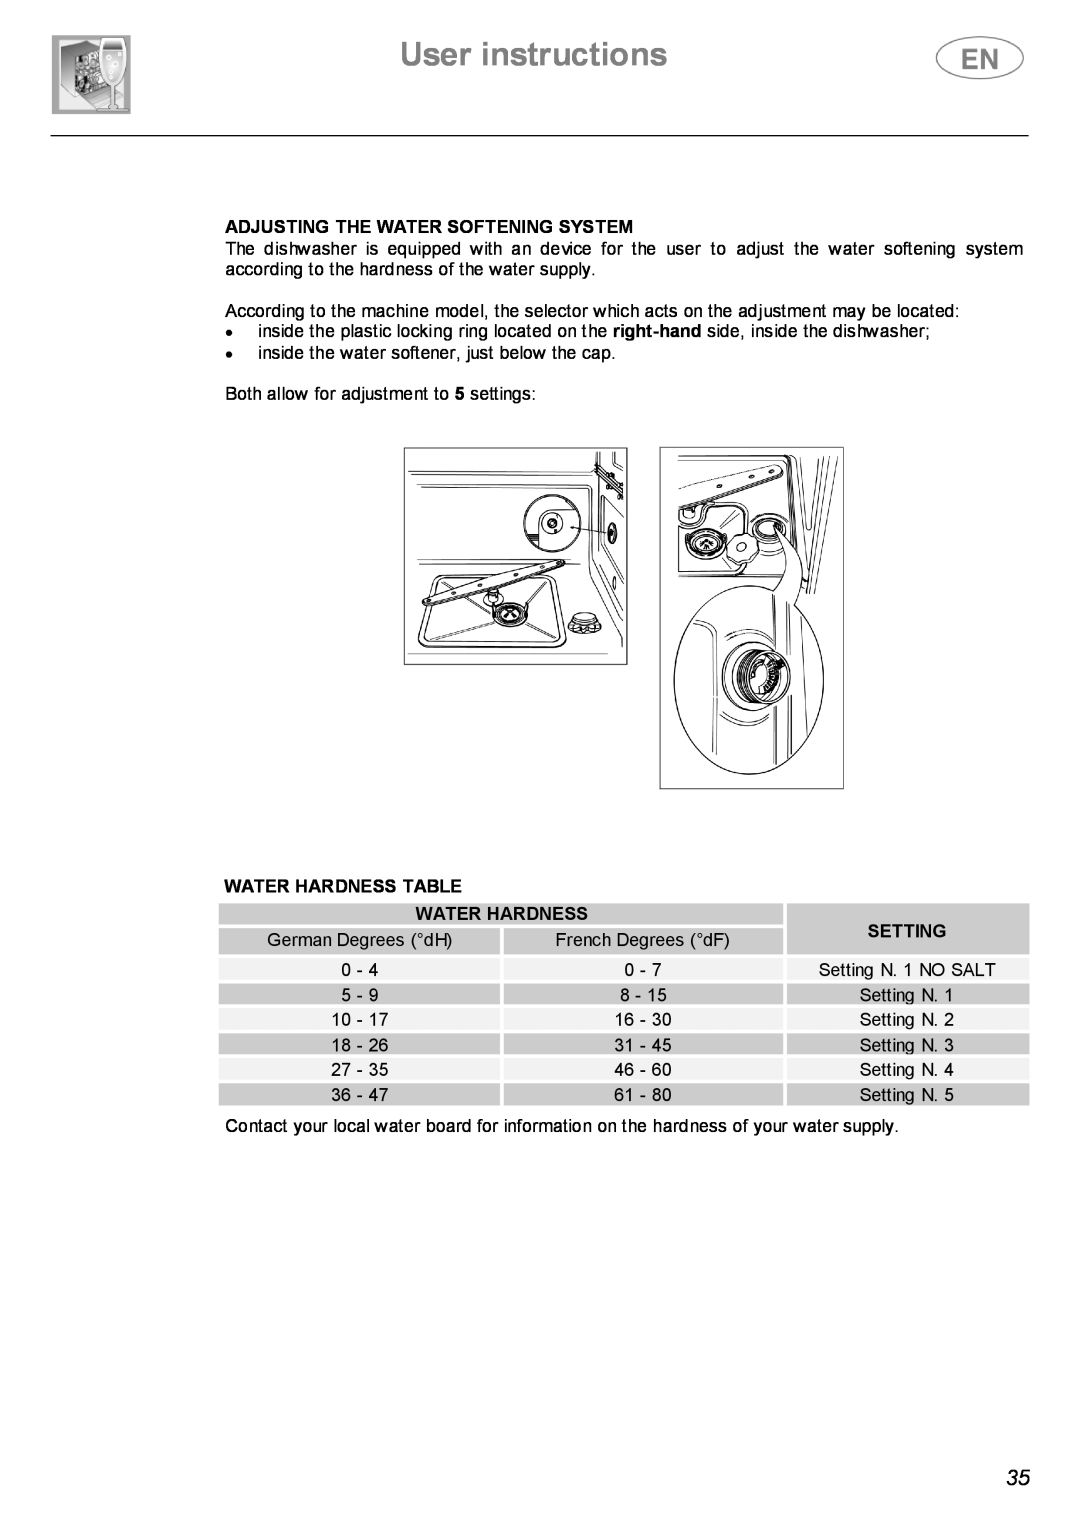 Smeg ST143 instruction manual Adjusting The Water Softening System, Water Hardness Table, Setting, User instructions 